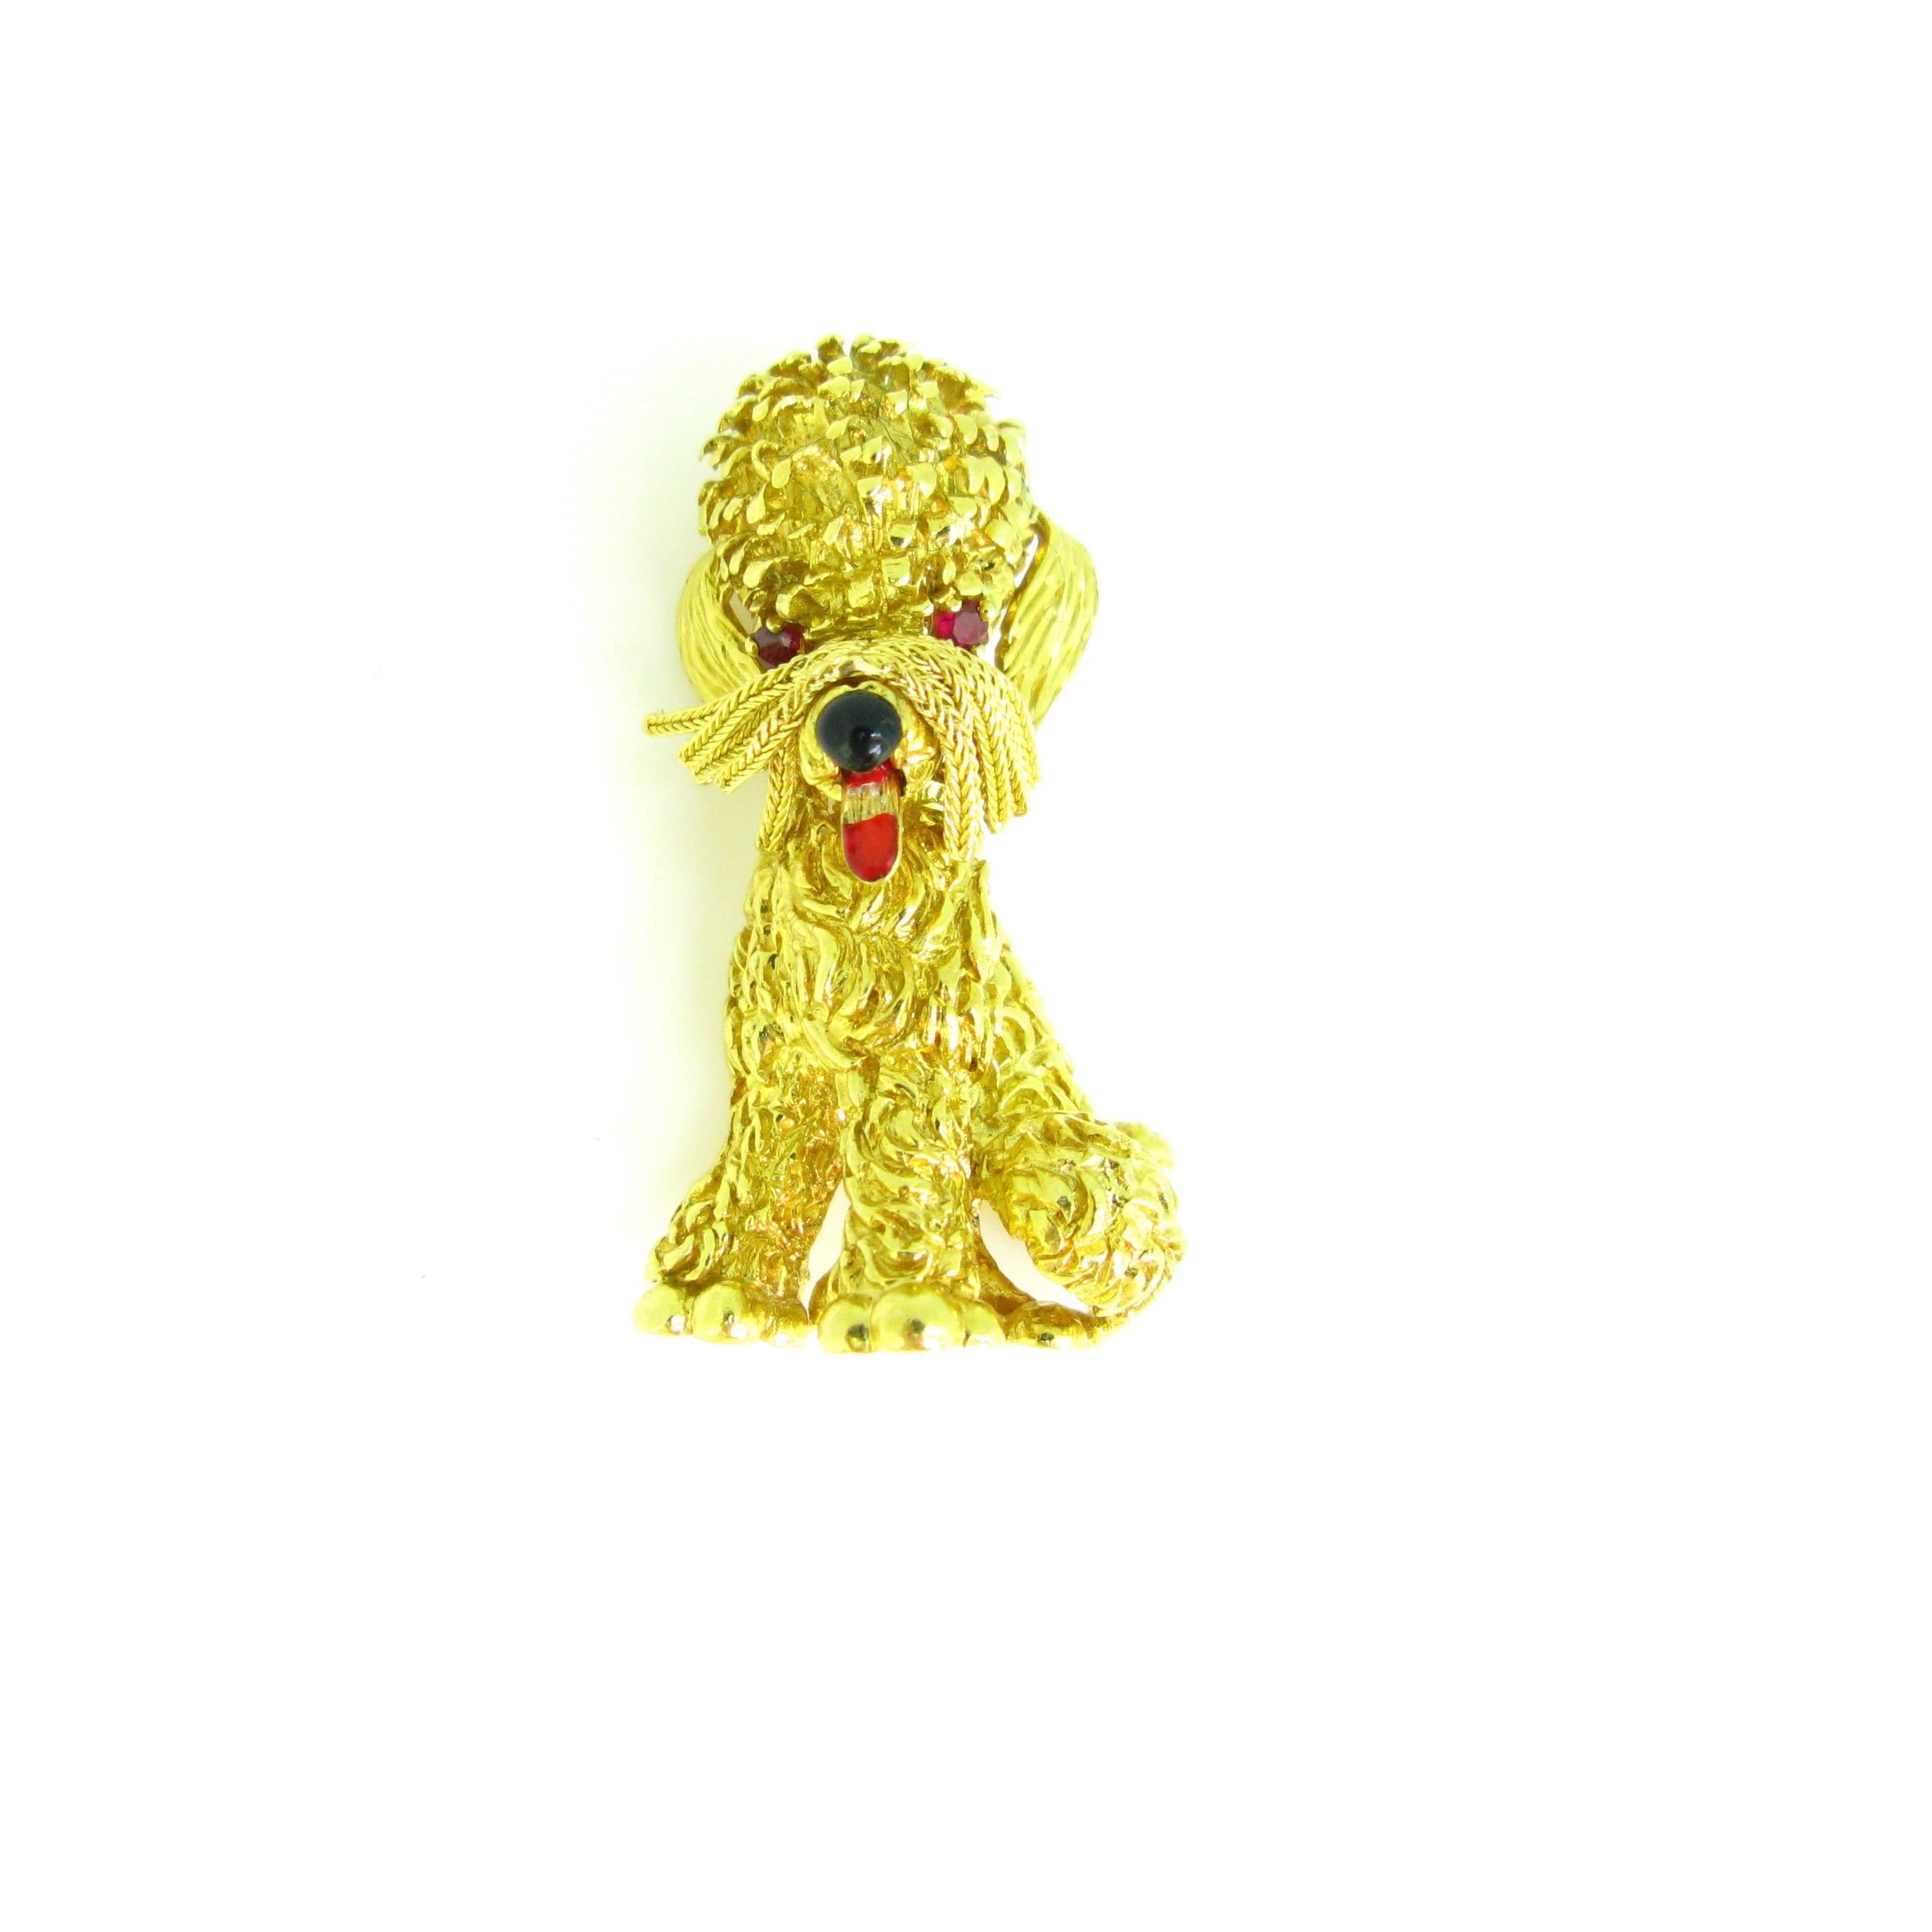 This whimsical poodle is fully made in 18kt solid gold. He has moving tassel whiskers. His nose and tong are enamelled. It was made in France circa 1960. We can clearly see the maker’s mark: N / two skittles / E,  for the jeweler Espezel, based in